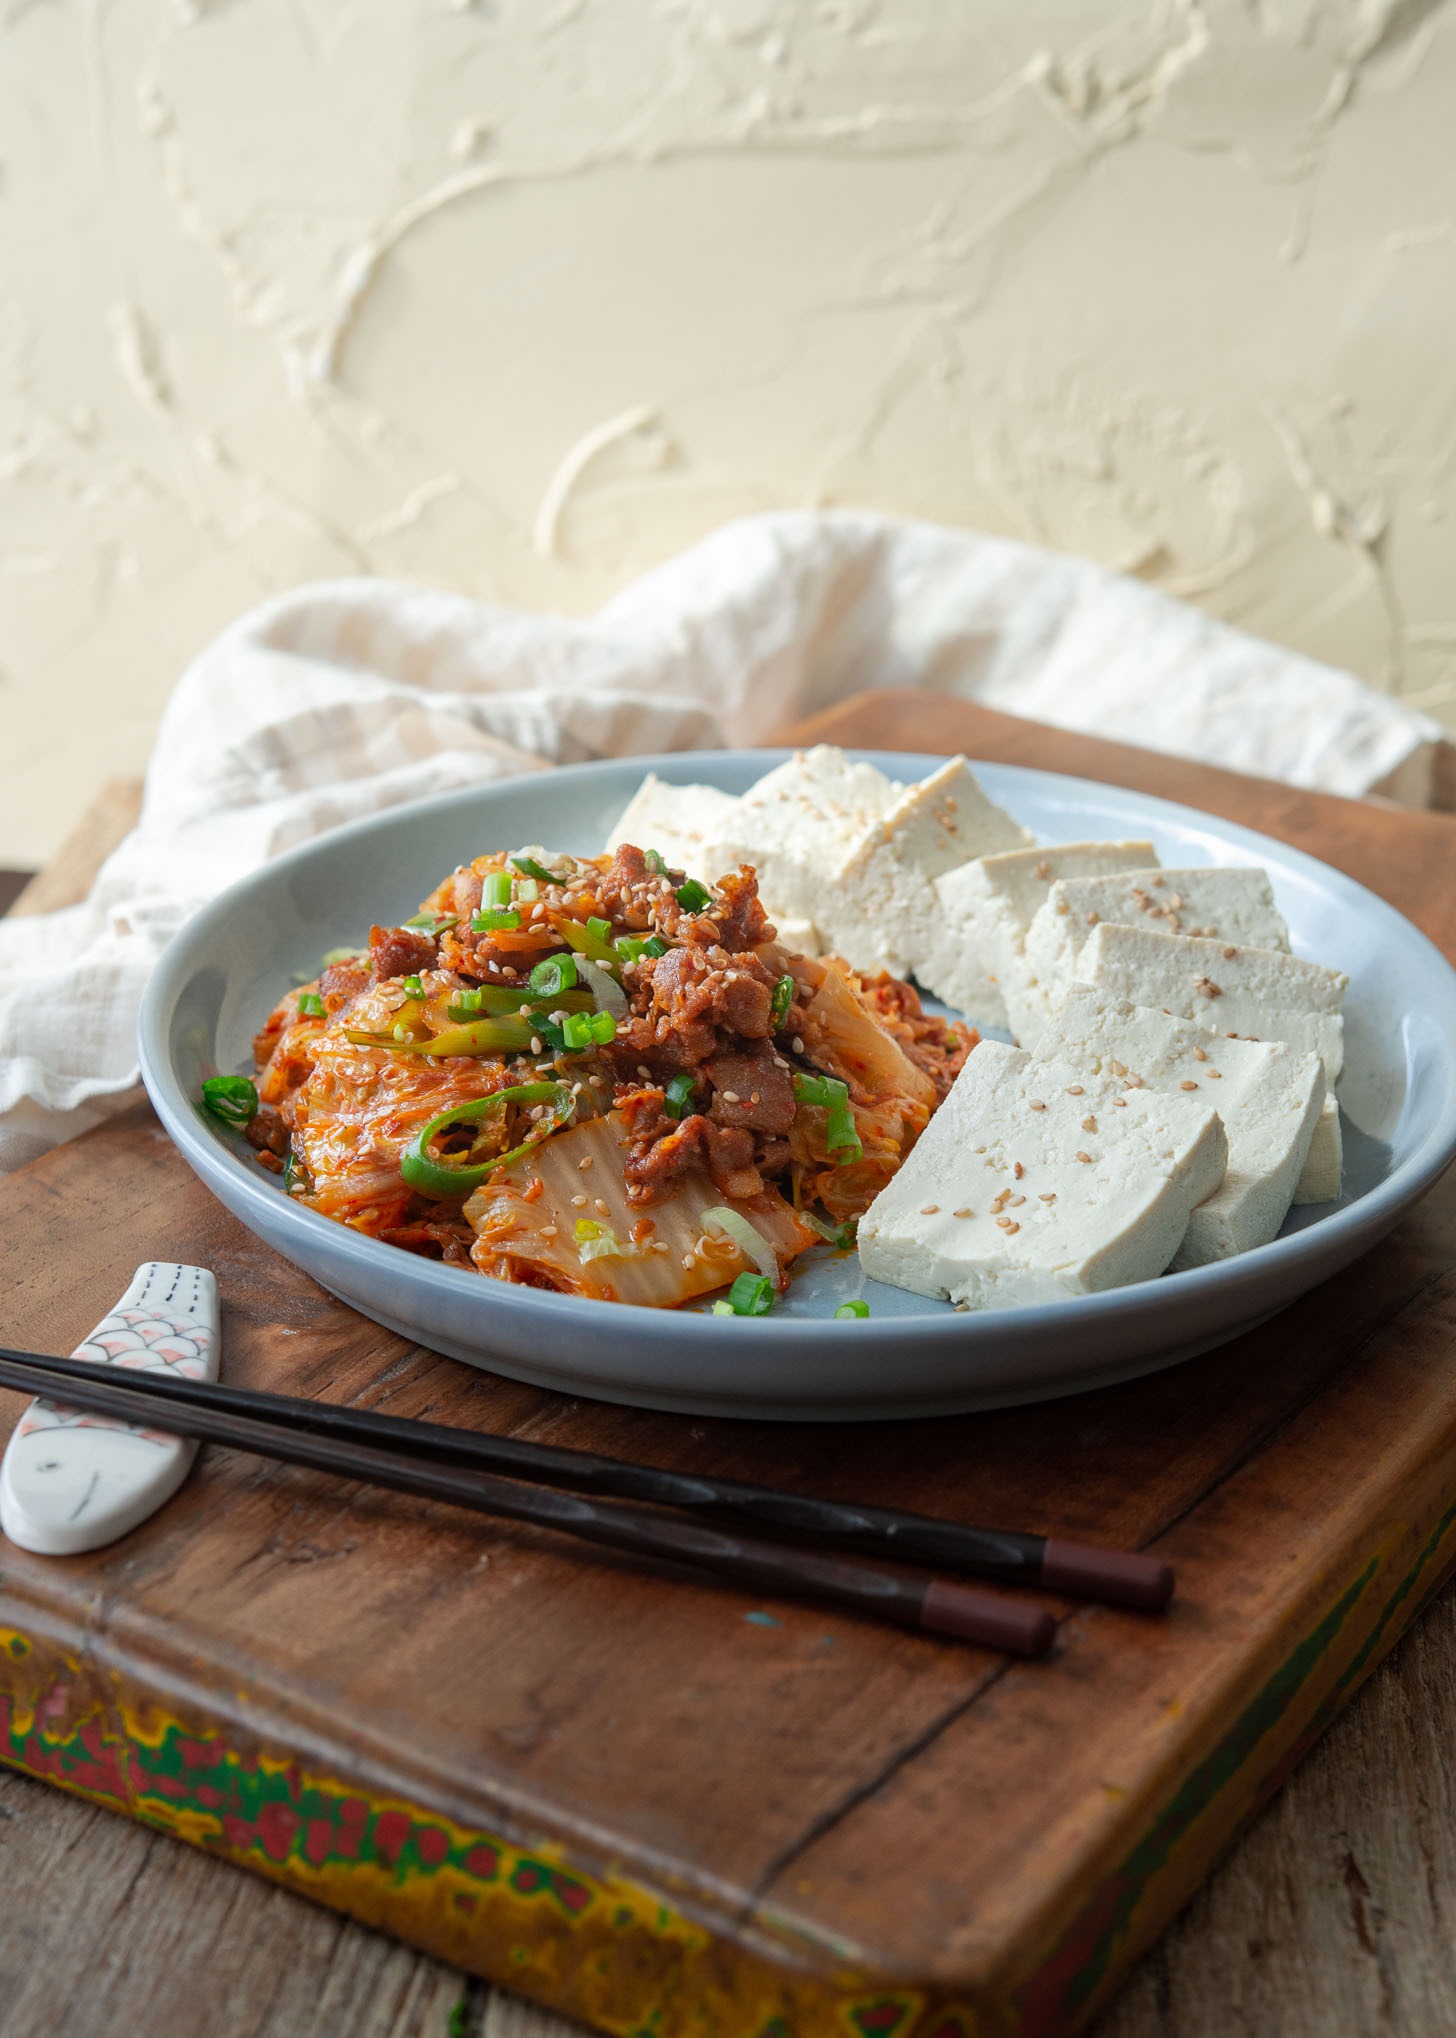 Slices of Korean boiled tofu is served with stir fried kimchi and pork on a plate.